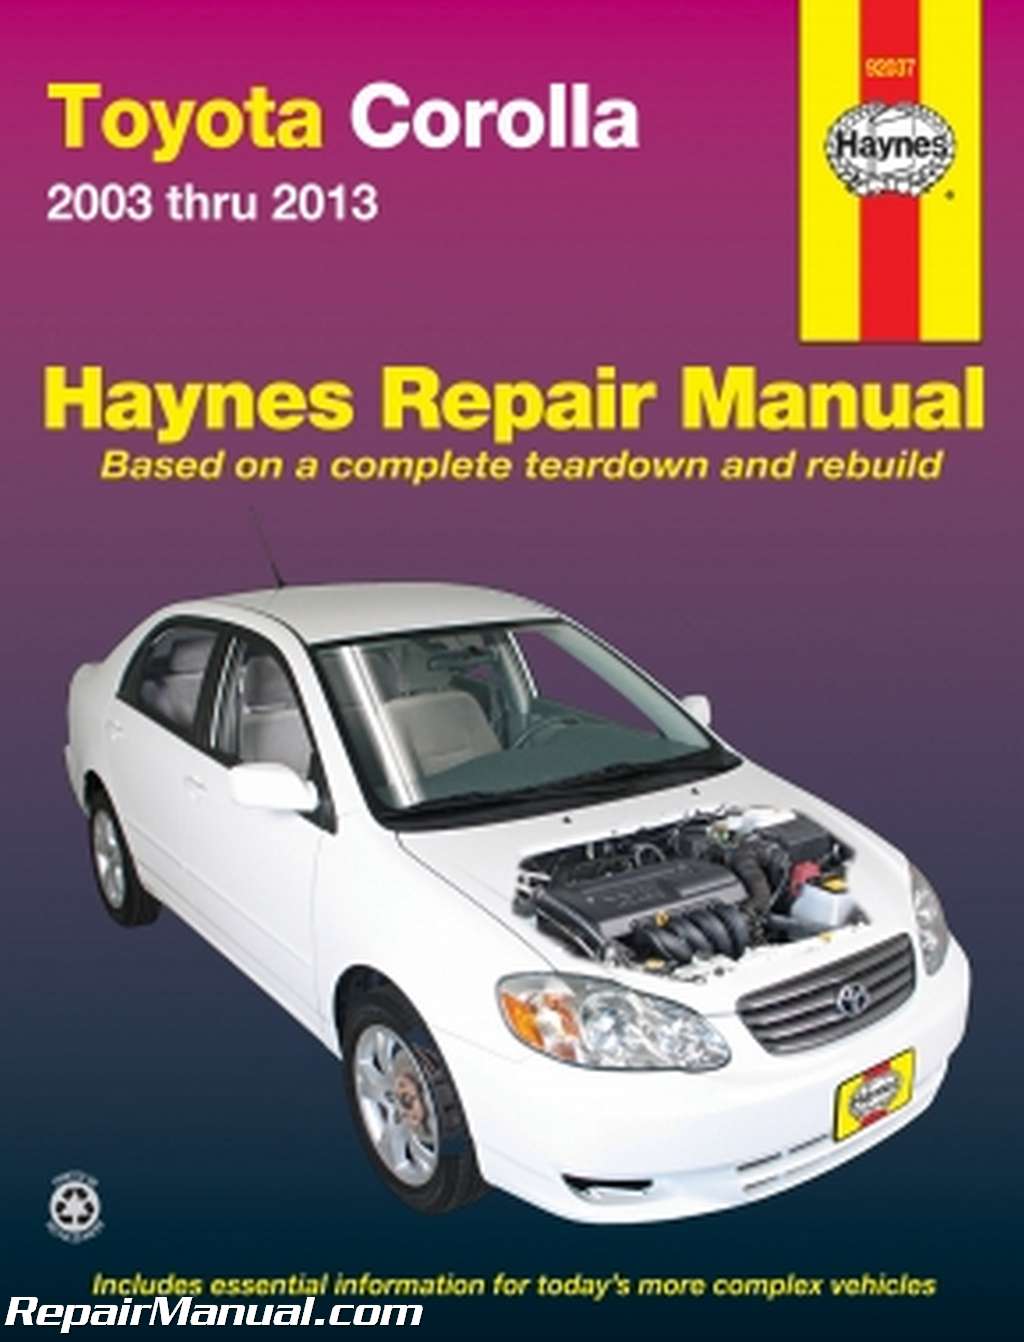 Service manual [What Is The Best Auto Repair Manual 2013 ...